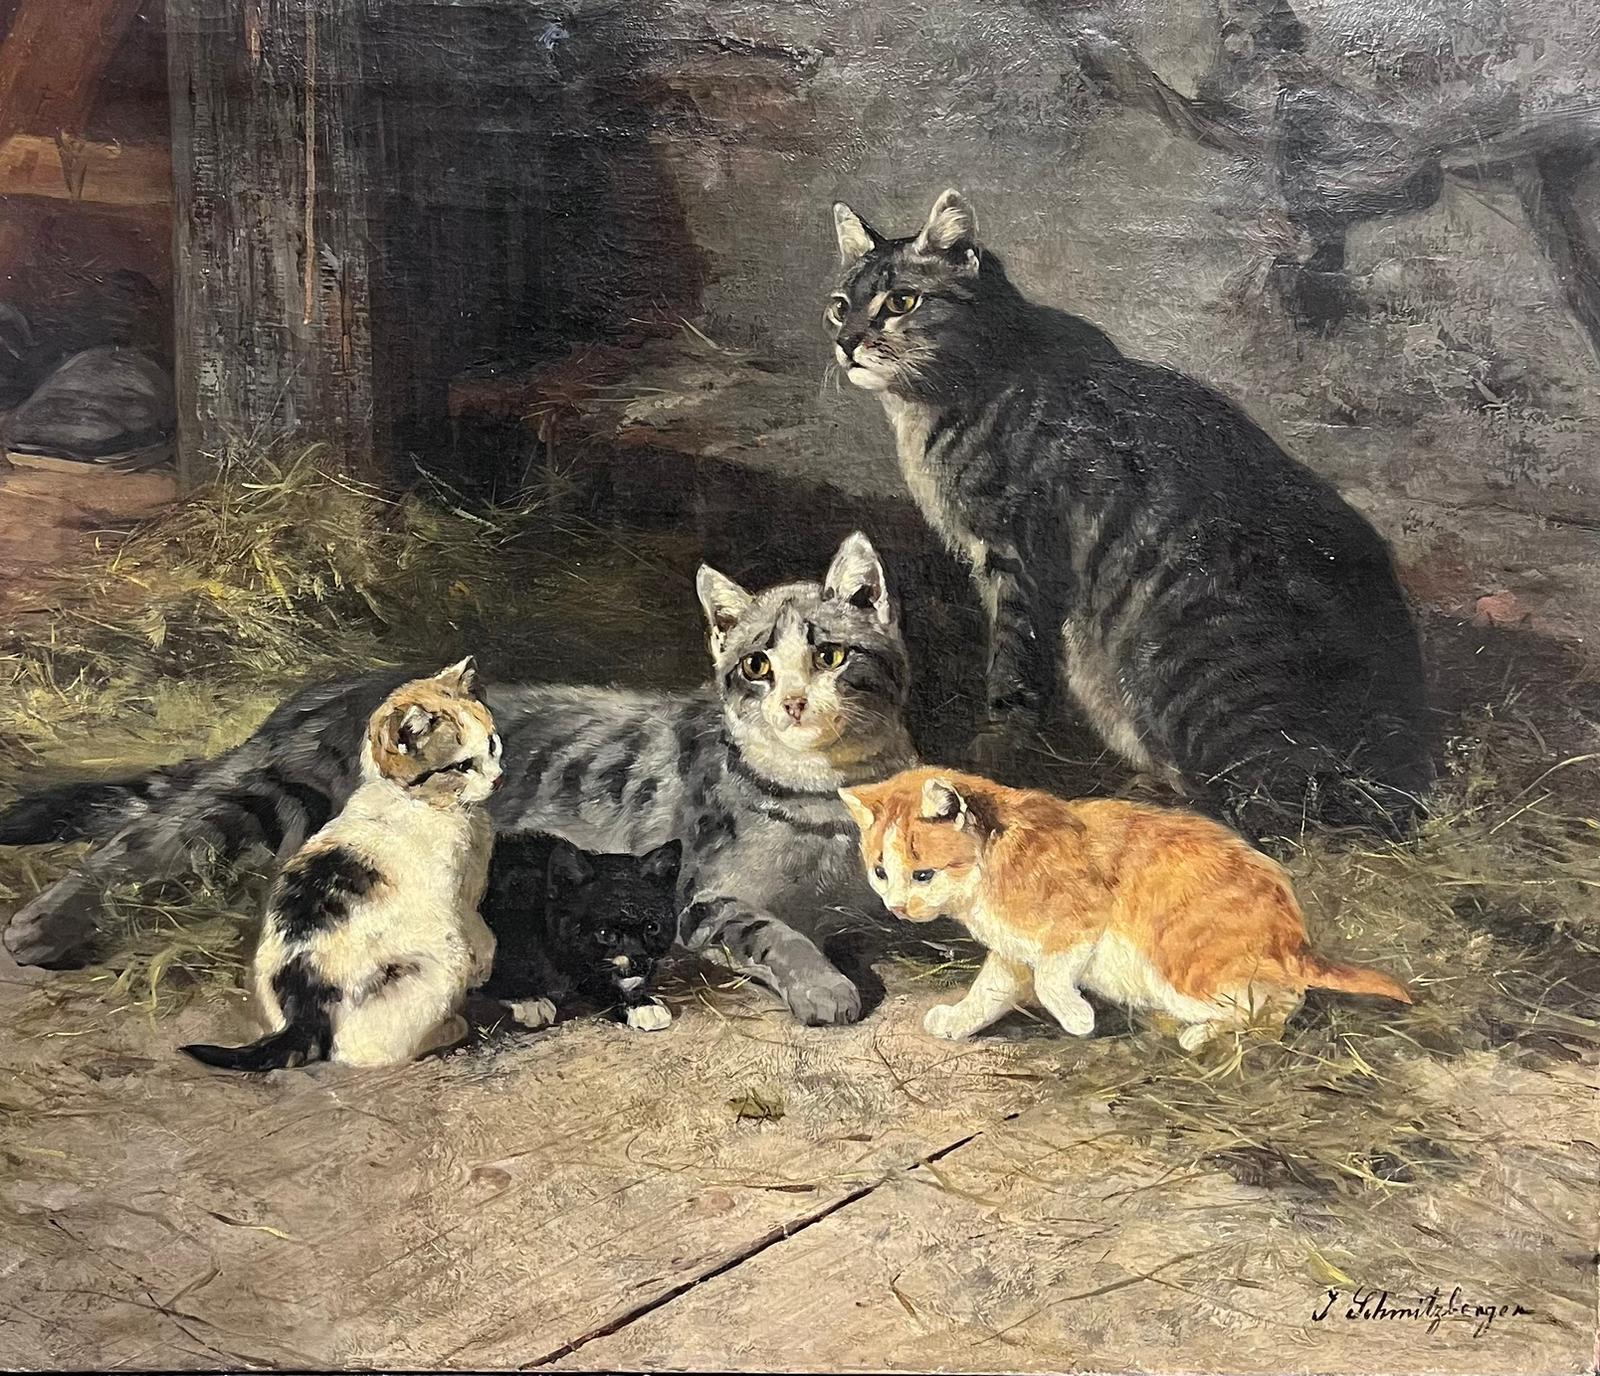 The Young Family of Cats
by Josef Schmitzberger (1851-c.1936) German
signed oil on canvas, unframed
canvas: 24 x 29.5 inches
provenance: private collection, England
condition: very good and sound condition though with old former repairs showing verso